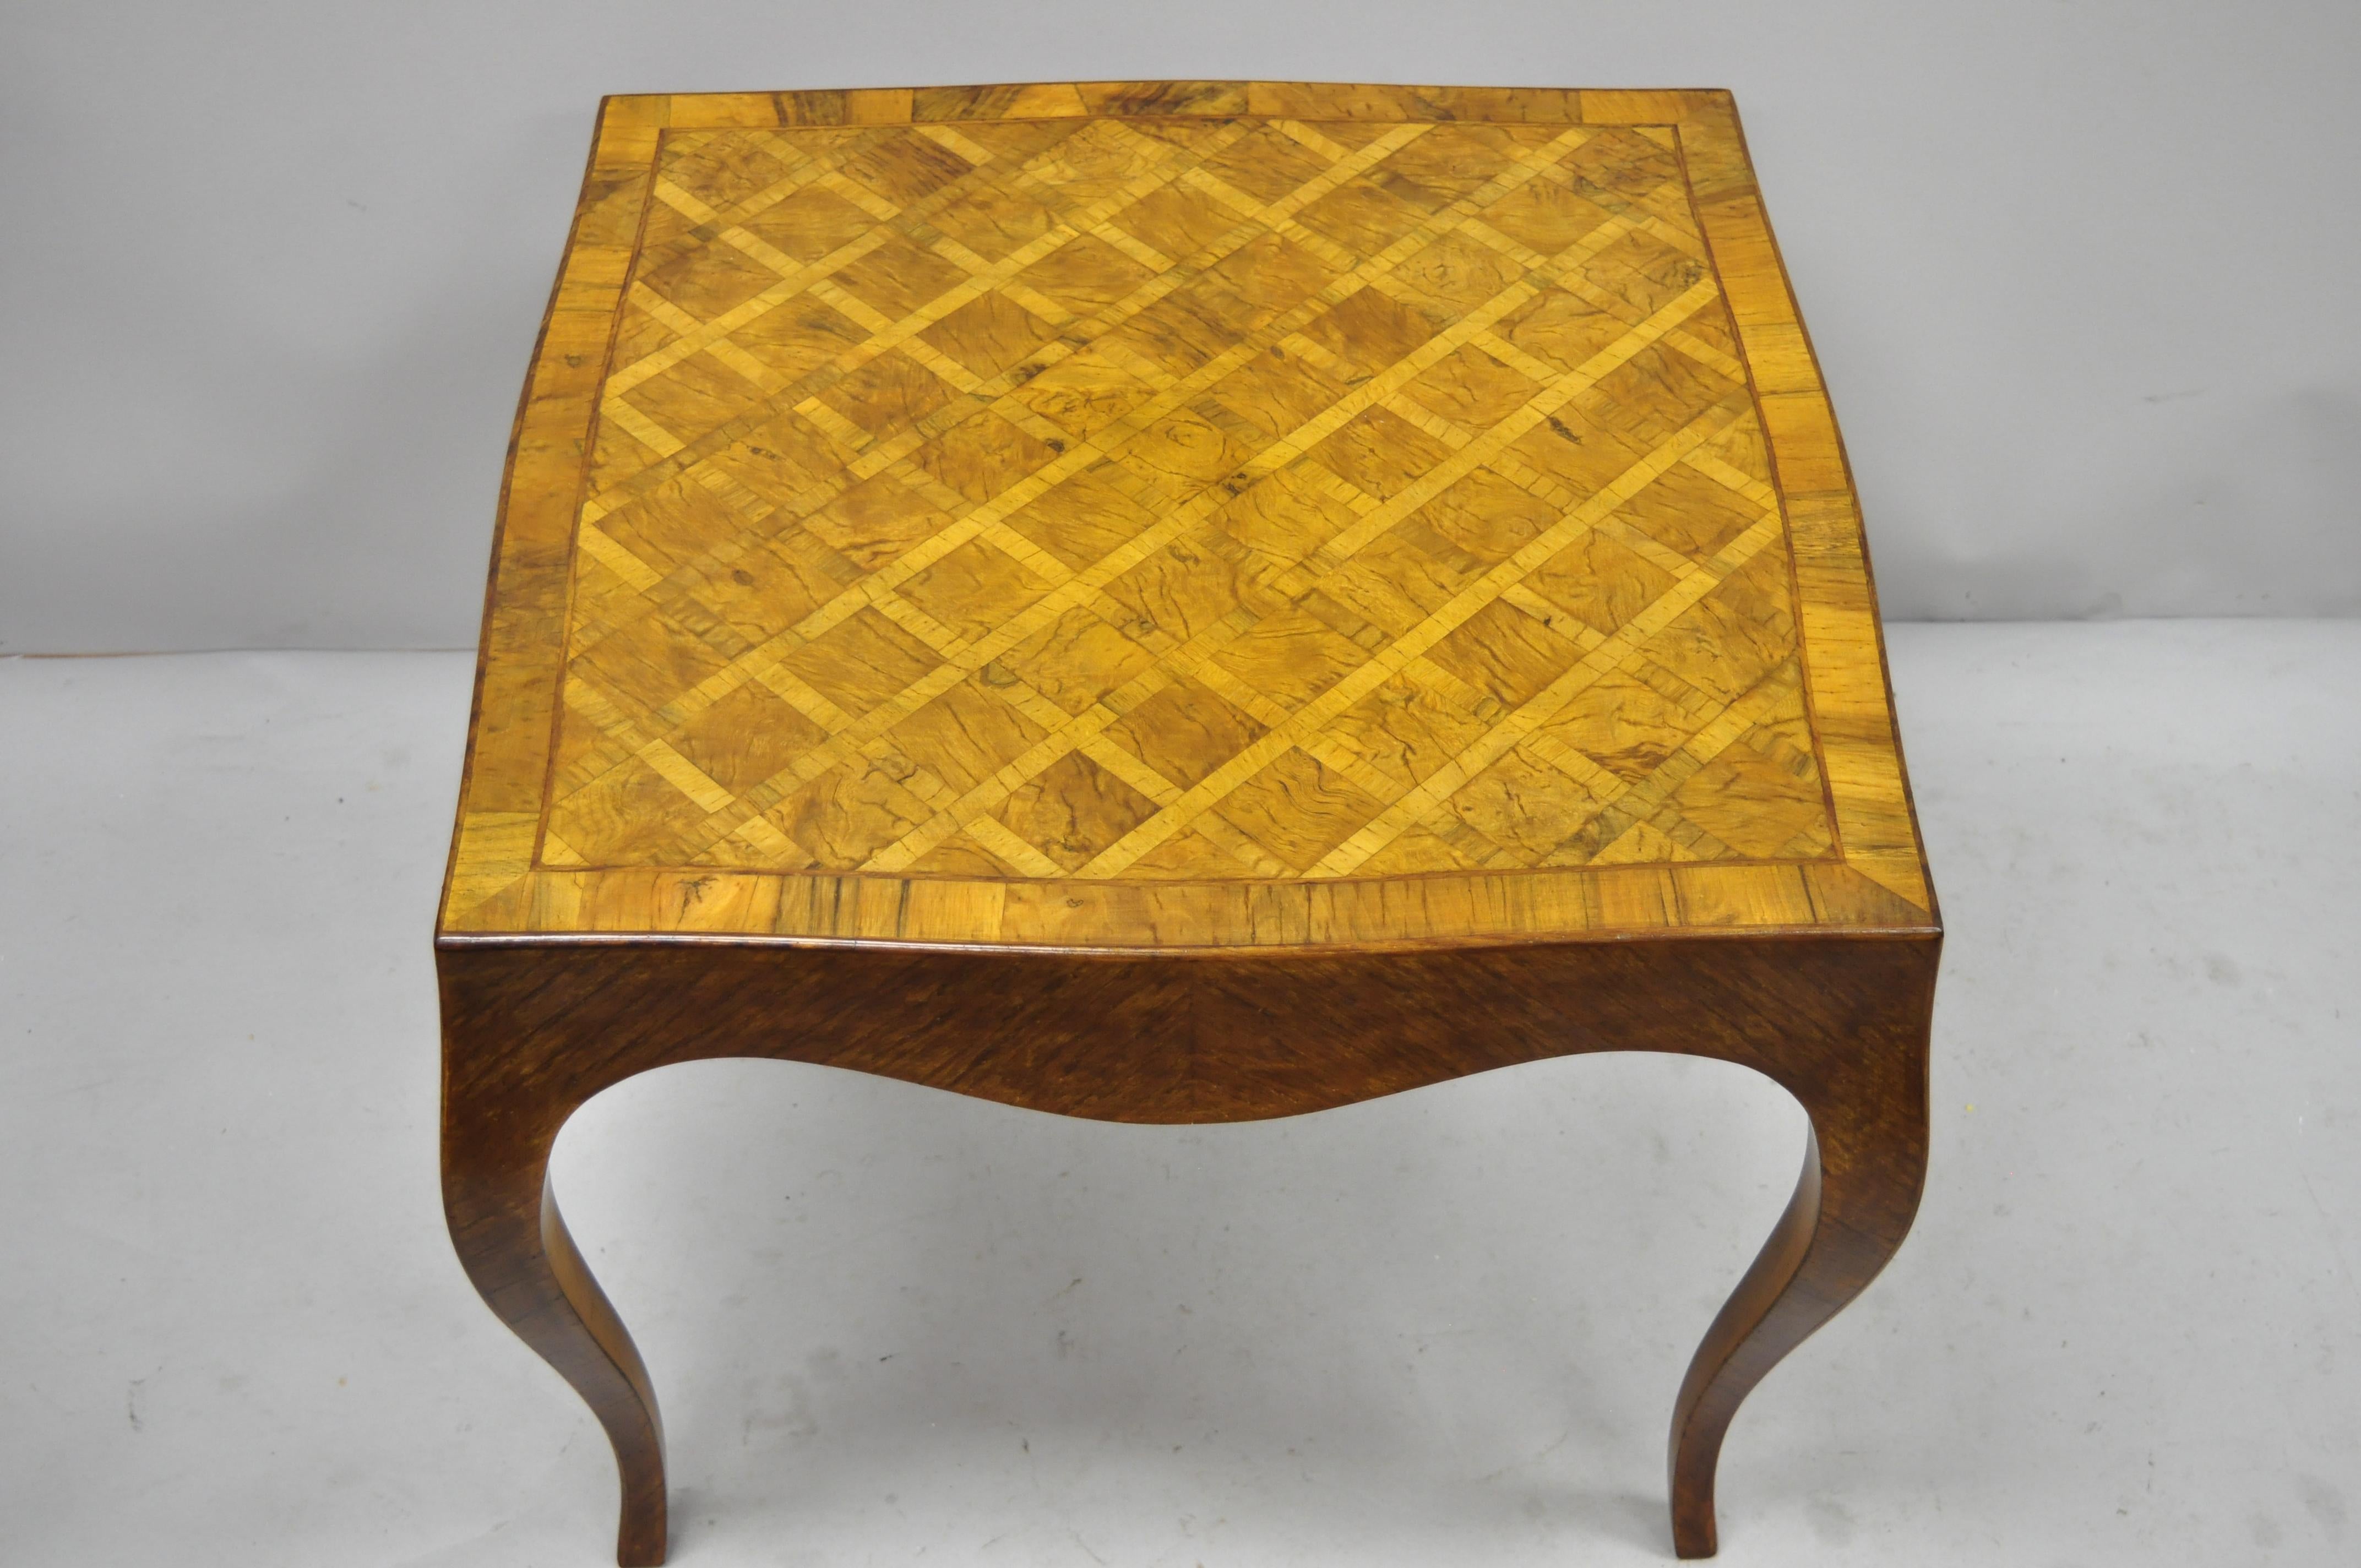 Italian Parquetry inlay olive wood square coffee side table in the Louis XV style. Item features cabriole legs, parquetry inlaid top, original 